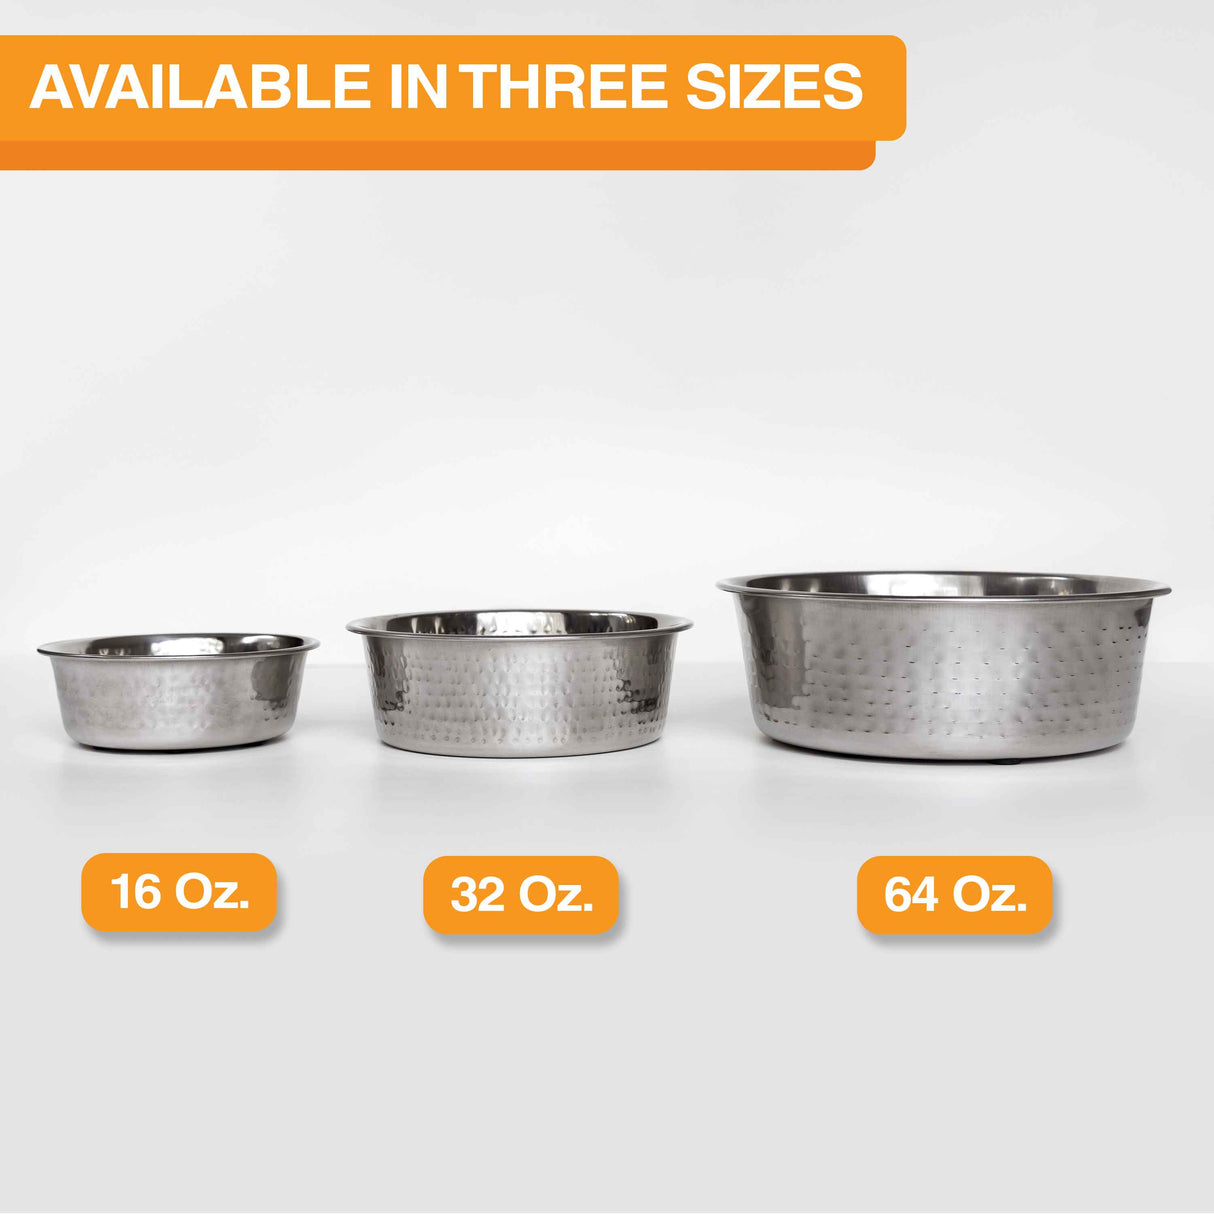 The Hammered Stainless Steel Bowl is available in a 16 oz., 32 oz. and a 64 oz. size